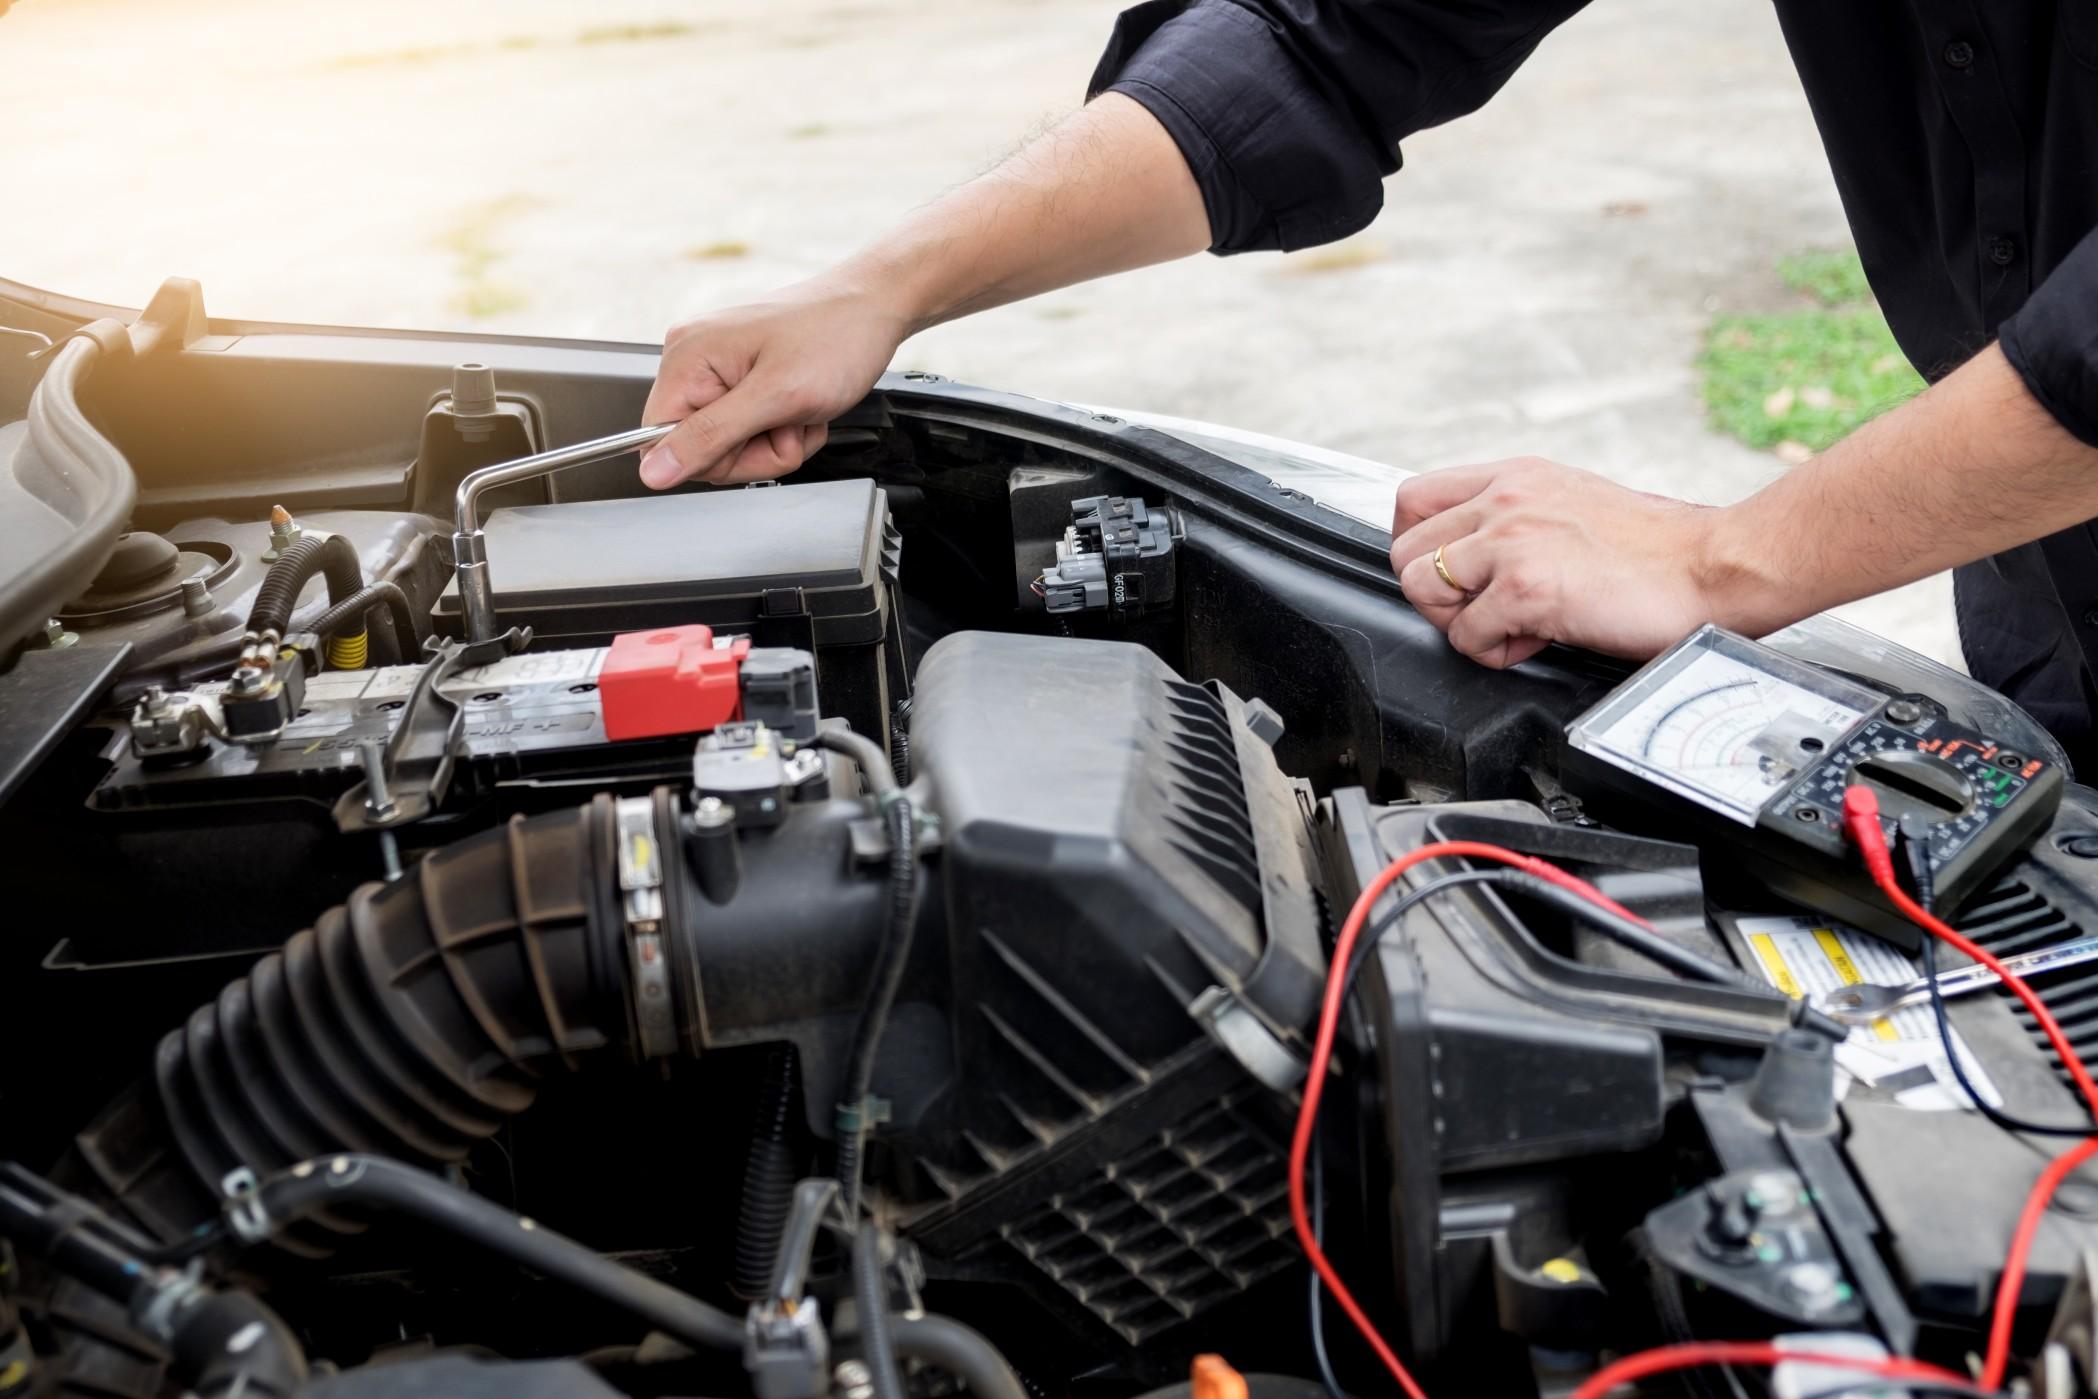 There’s a few car maintenance myths you should reconsider